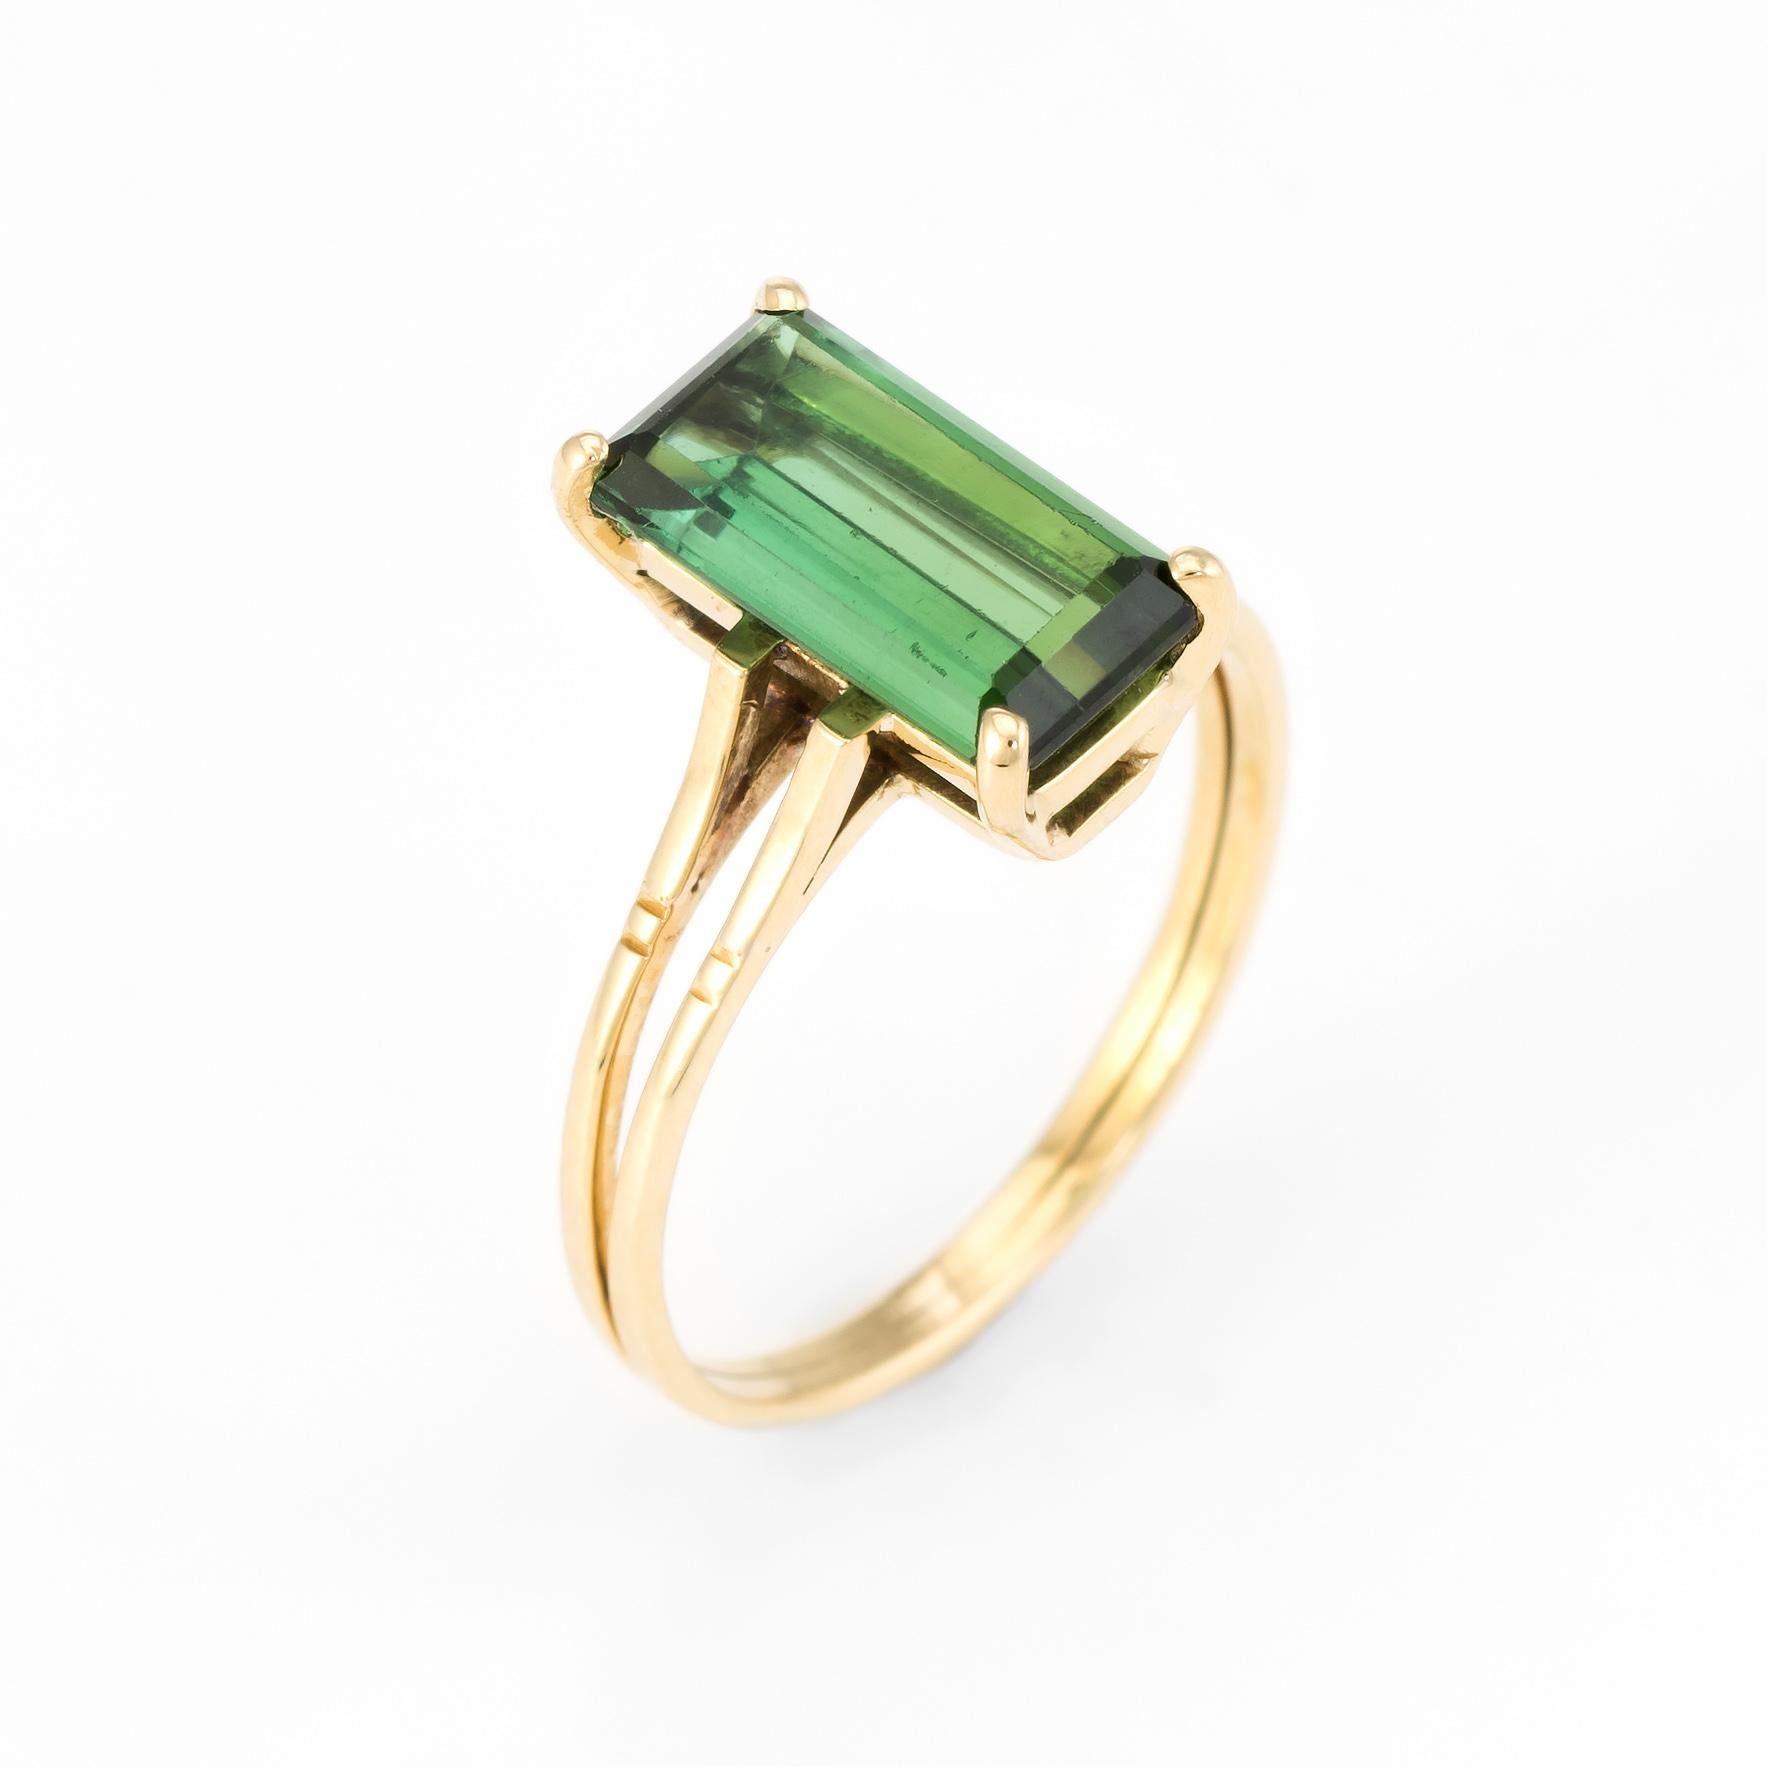 Elegant vintage small cocktail ring, crafted in 18 karat yellow gold. 

Emerald cut green tourmaline measures 11mm x 5.75mm (estimated at 2.50 carats). The tourmaline is in excellent condition and free of cracks or chips.   

The ring is in